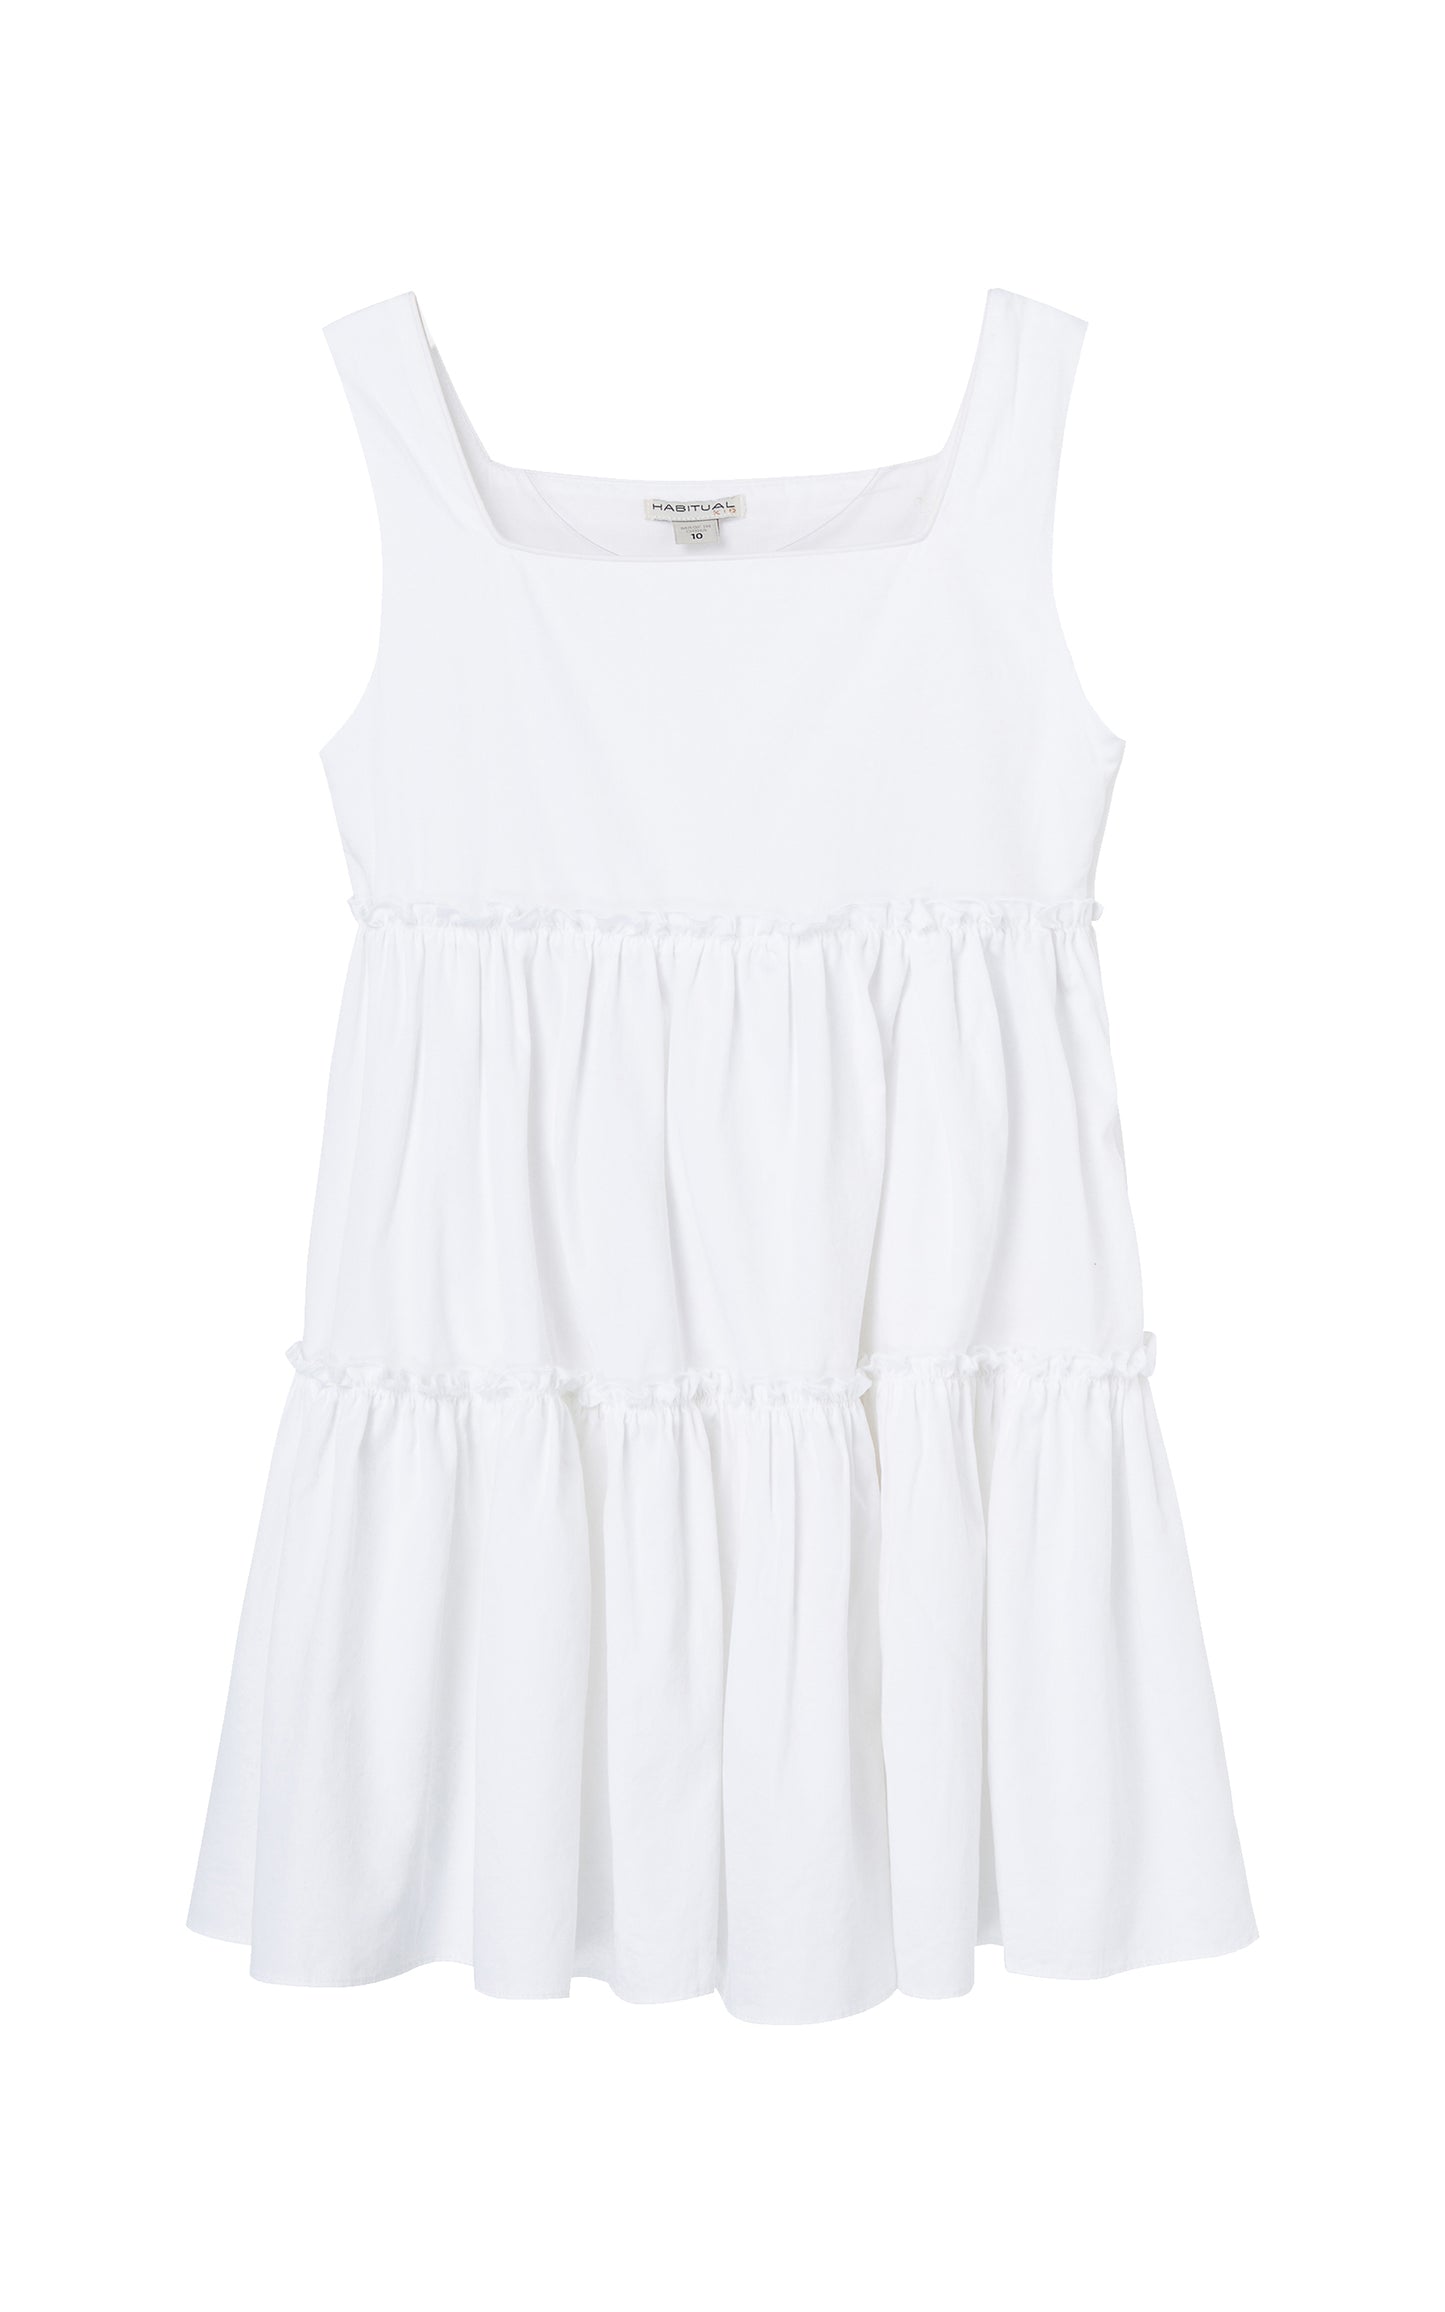 White tiered baby doll dress